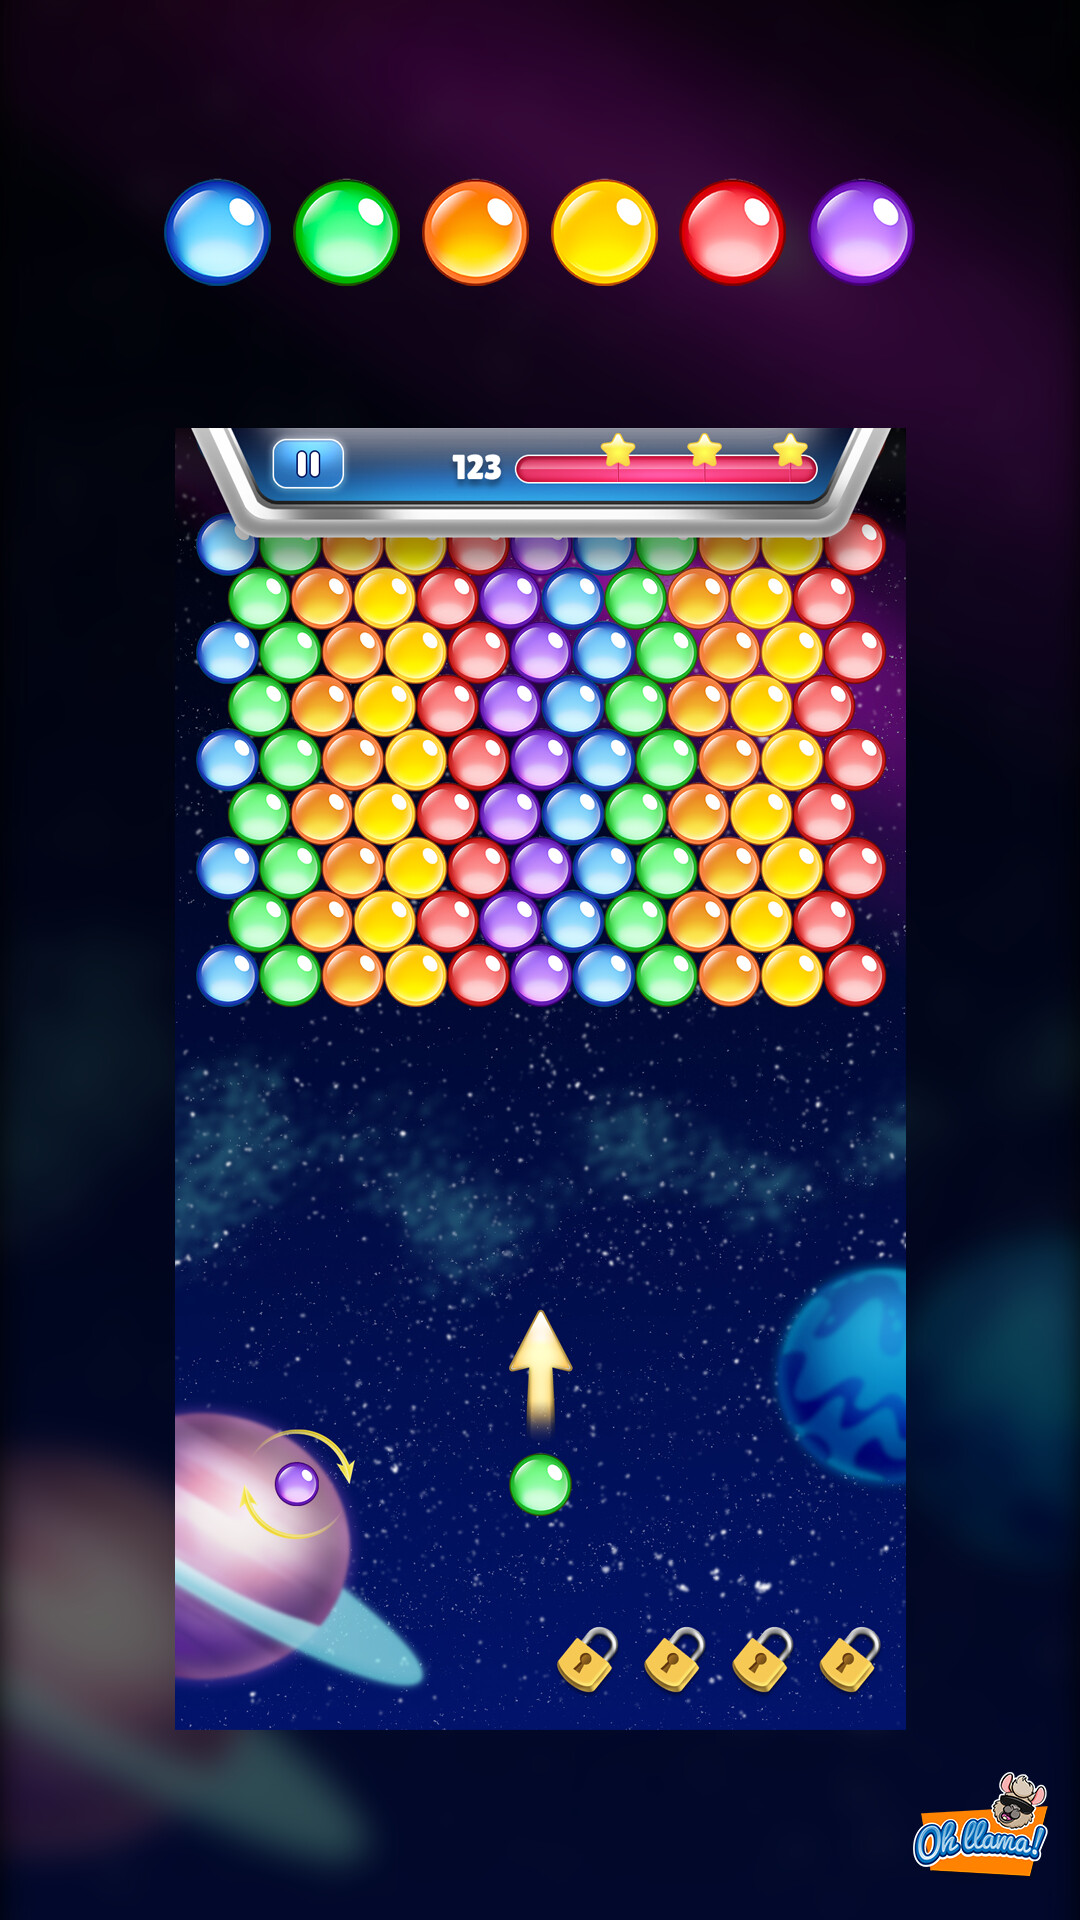 Ziv Ariely - POP THE BUBBLES, A BUBBLE SHOOTER GAME